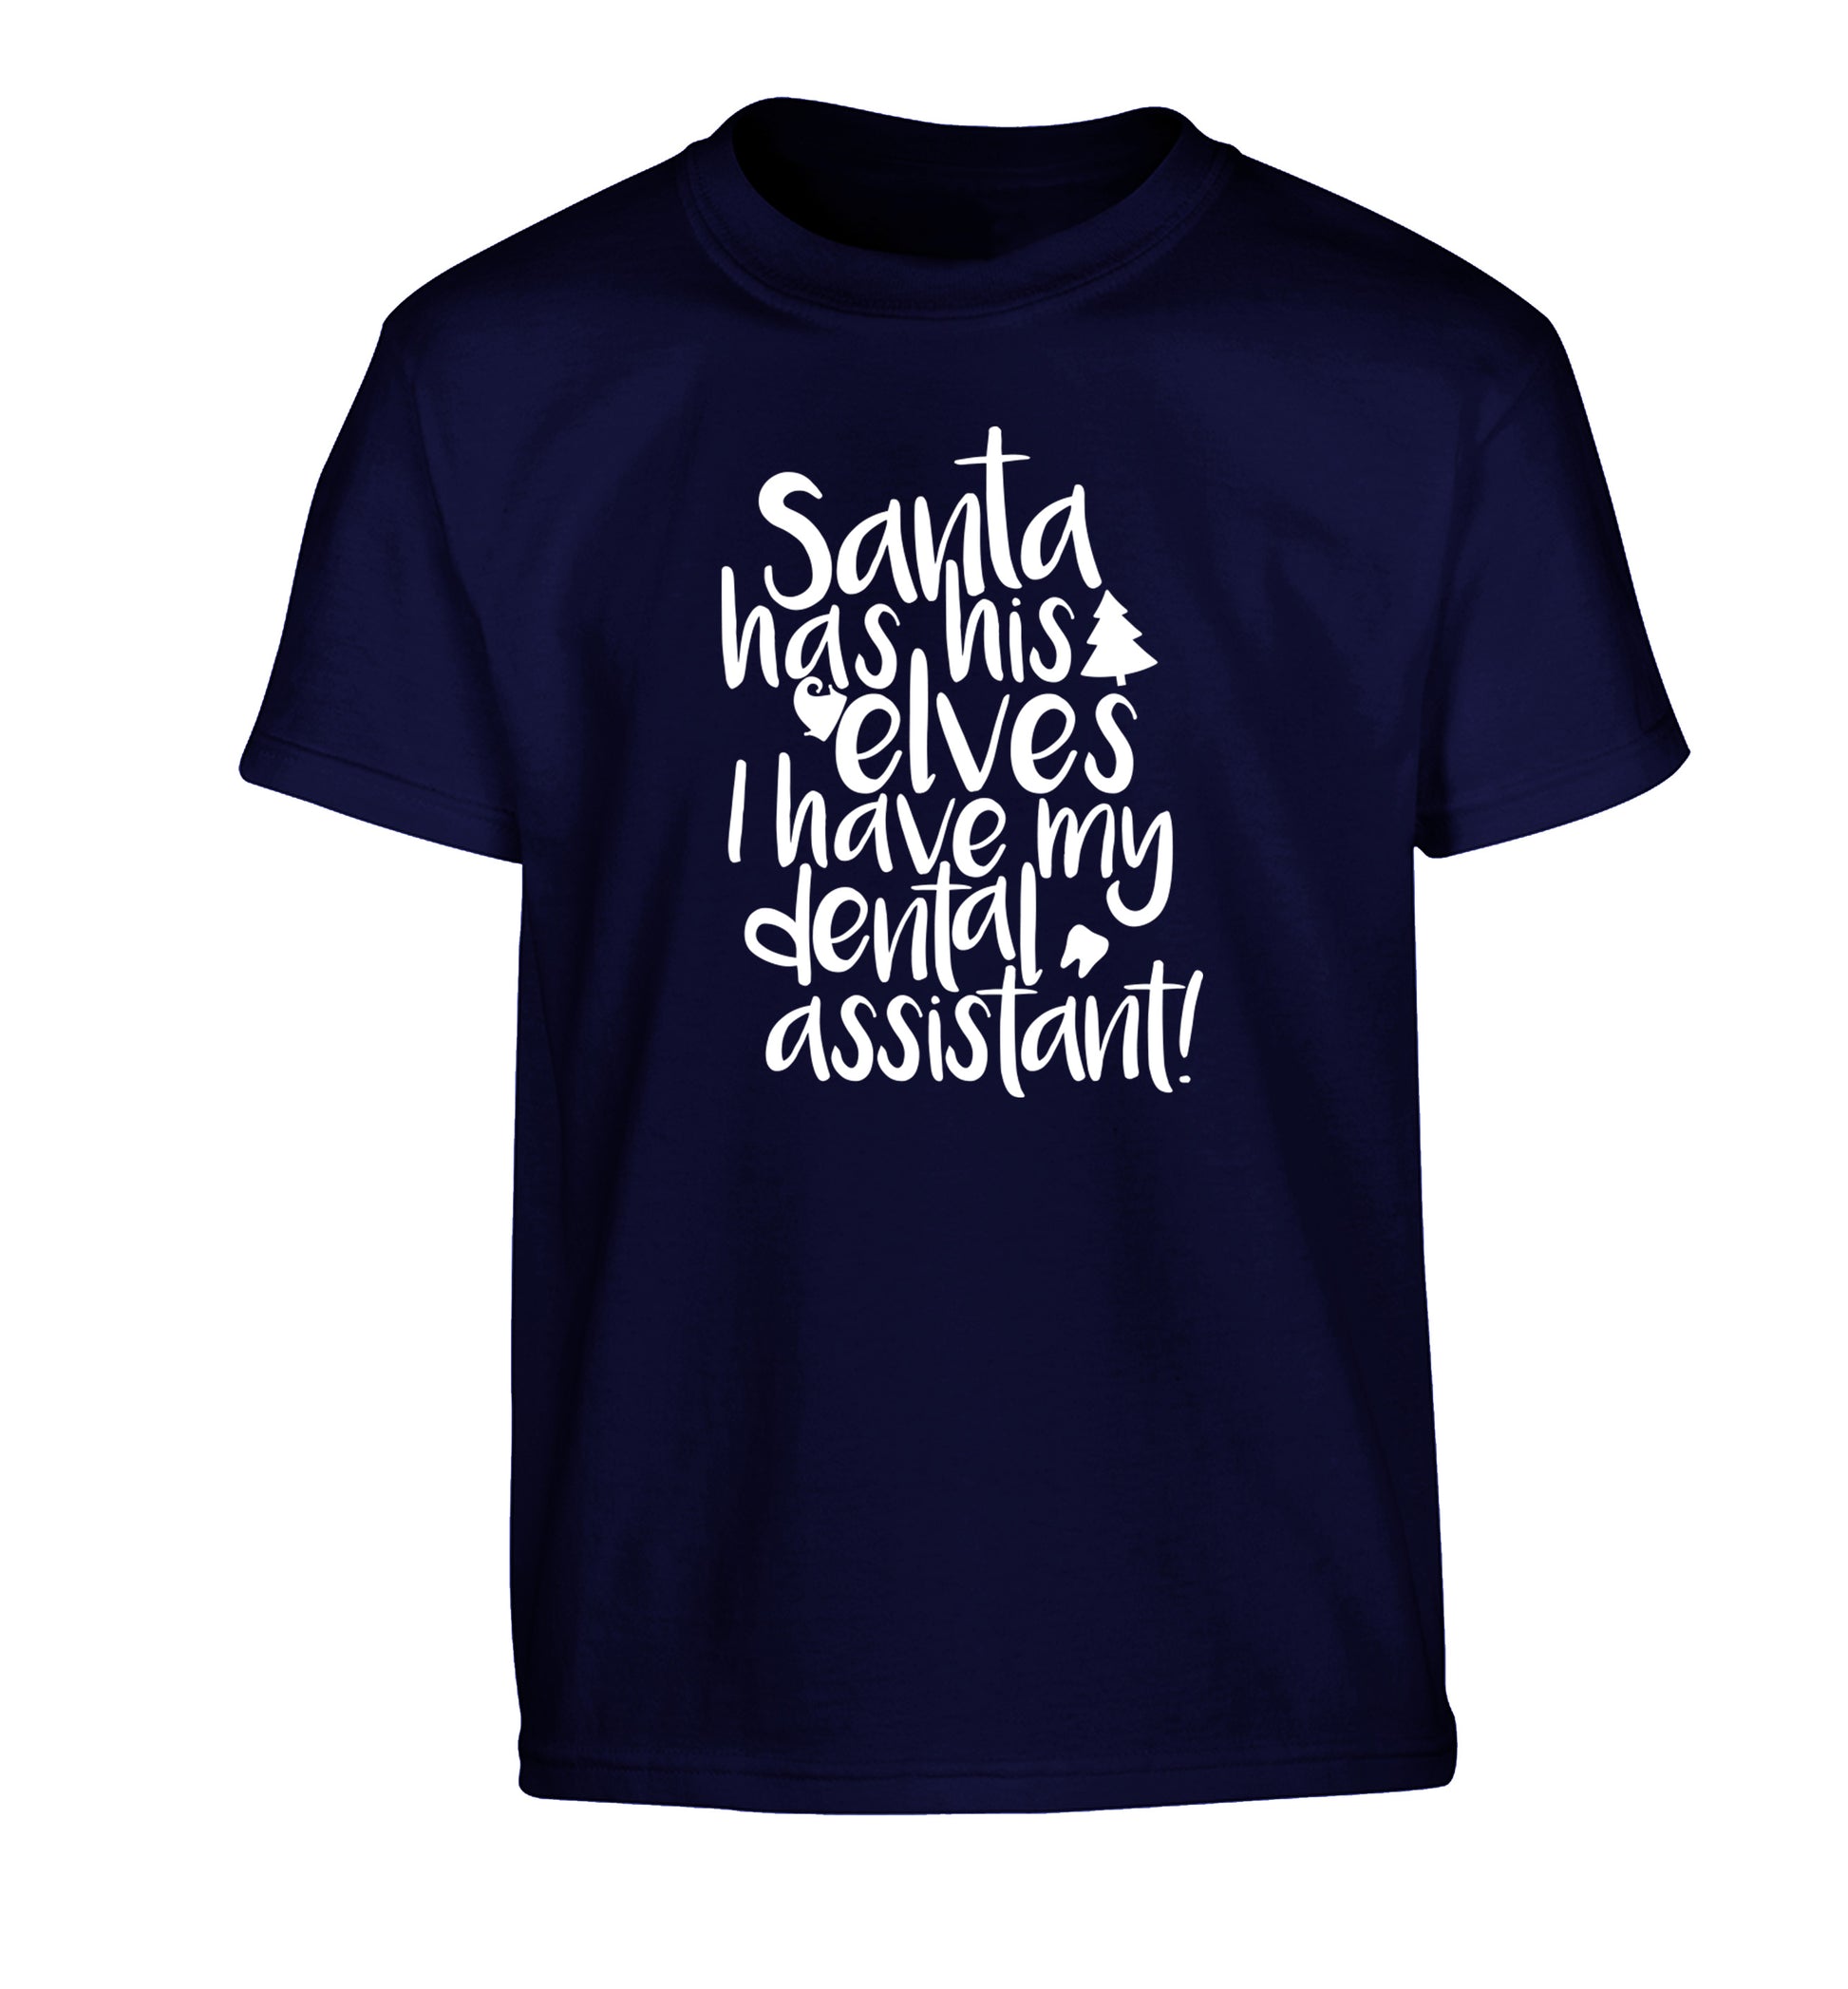 Santa has his elves I have my dental assistant Children's navy Tshirt 12-14 Years